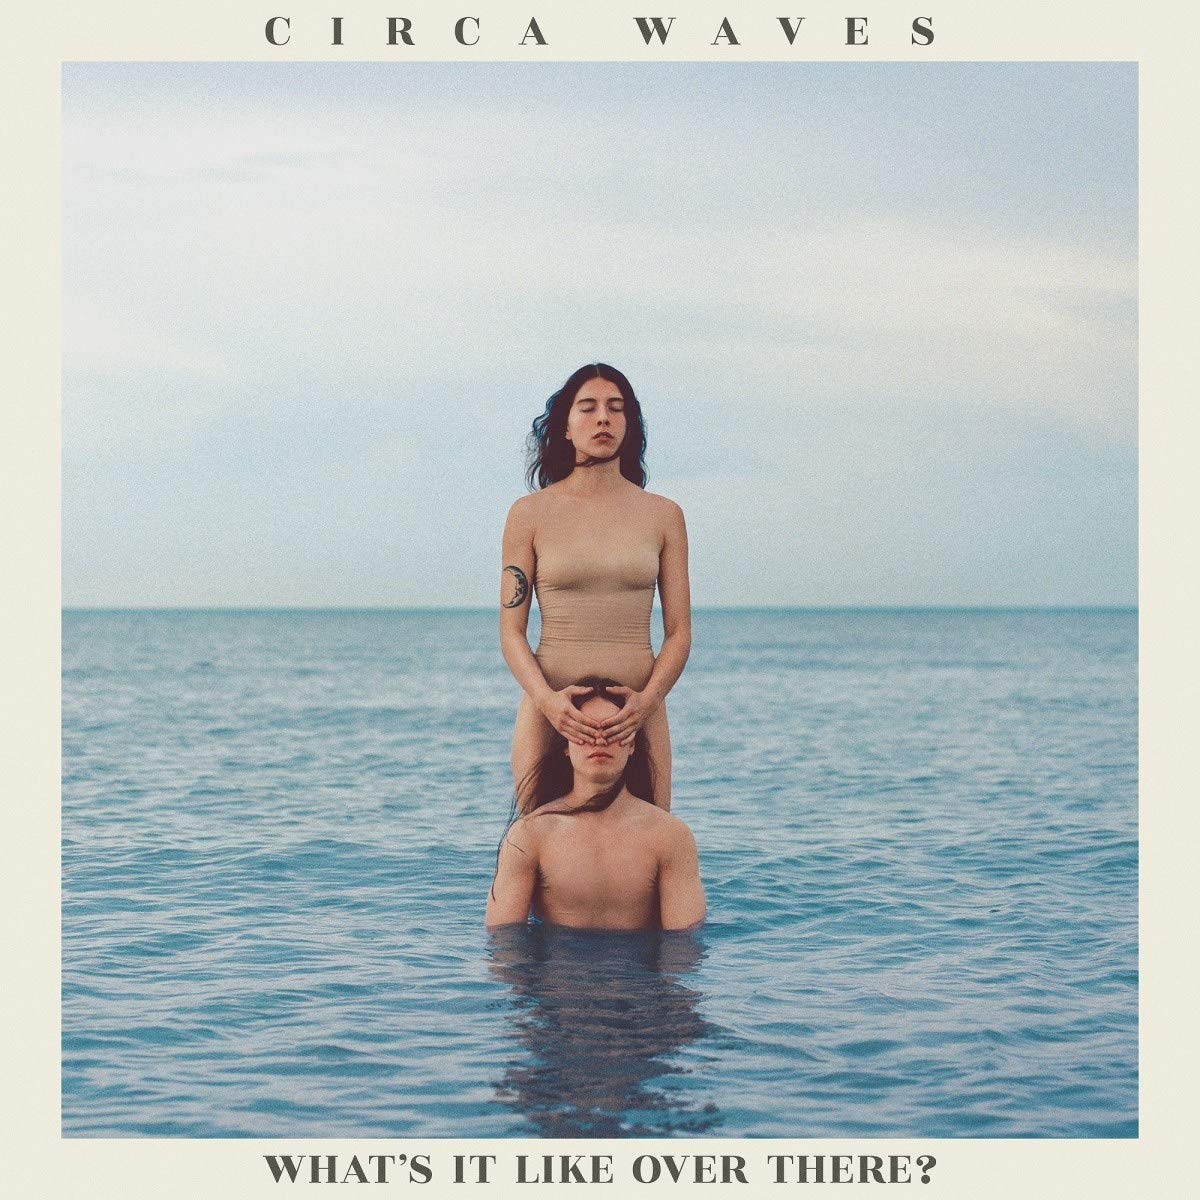 CIRCA WAVES - What’s It Like Over There? (LSRD 2020) - Limited Orange Vinyl